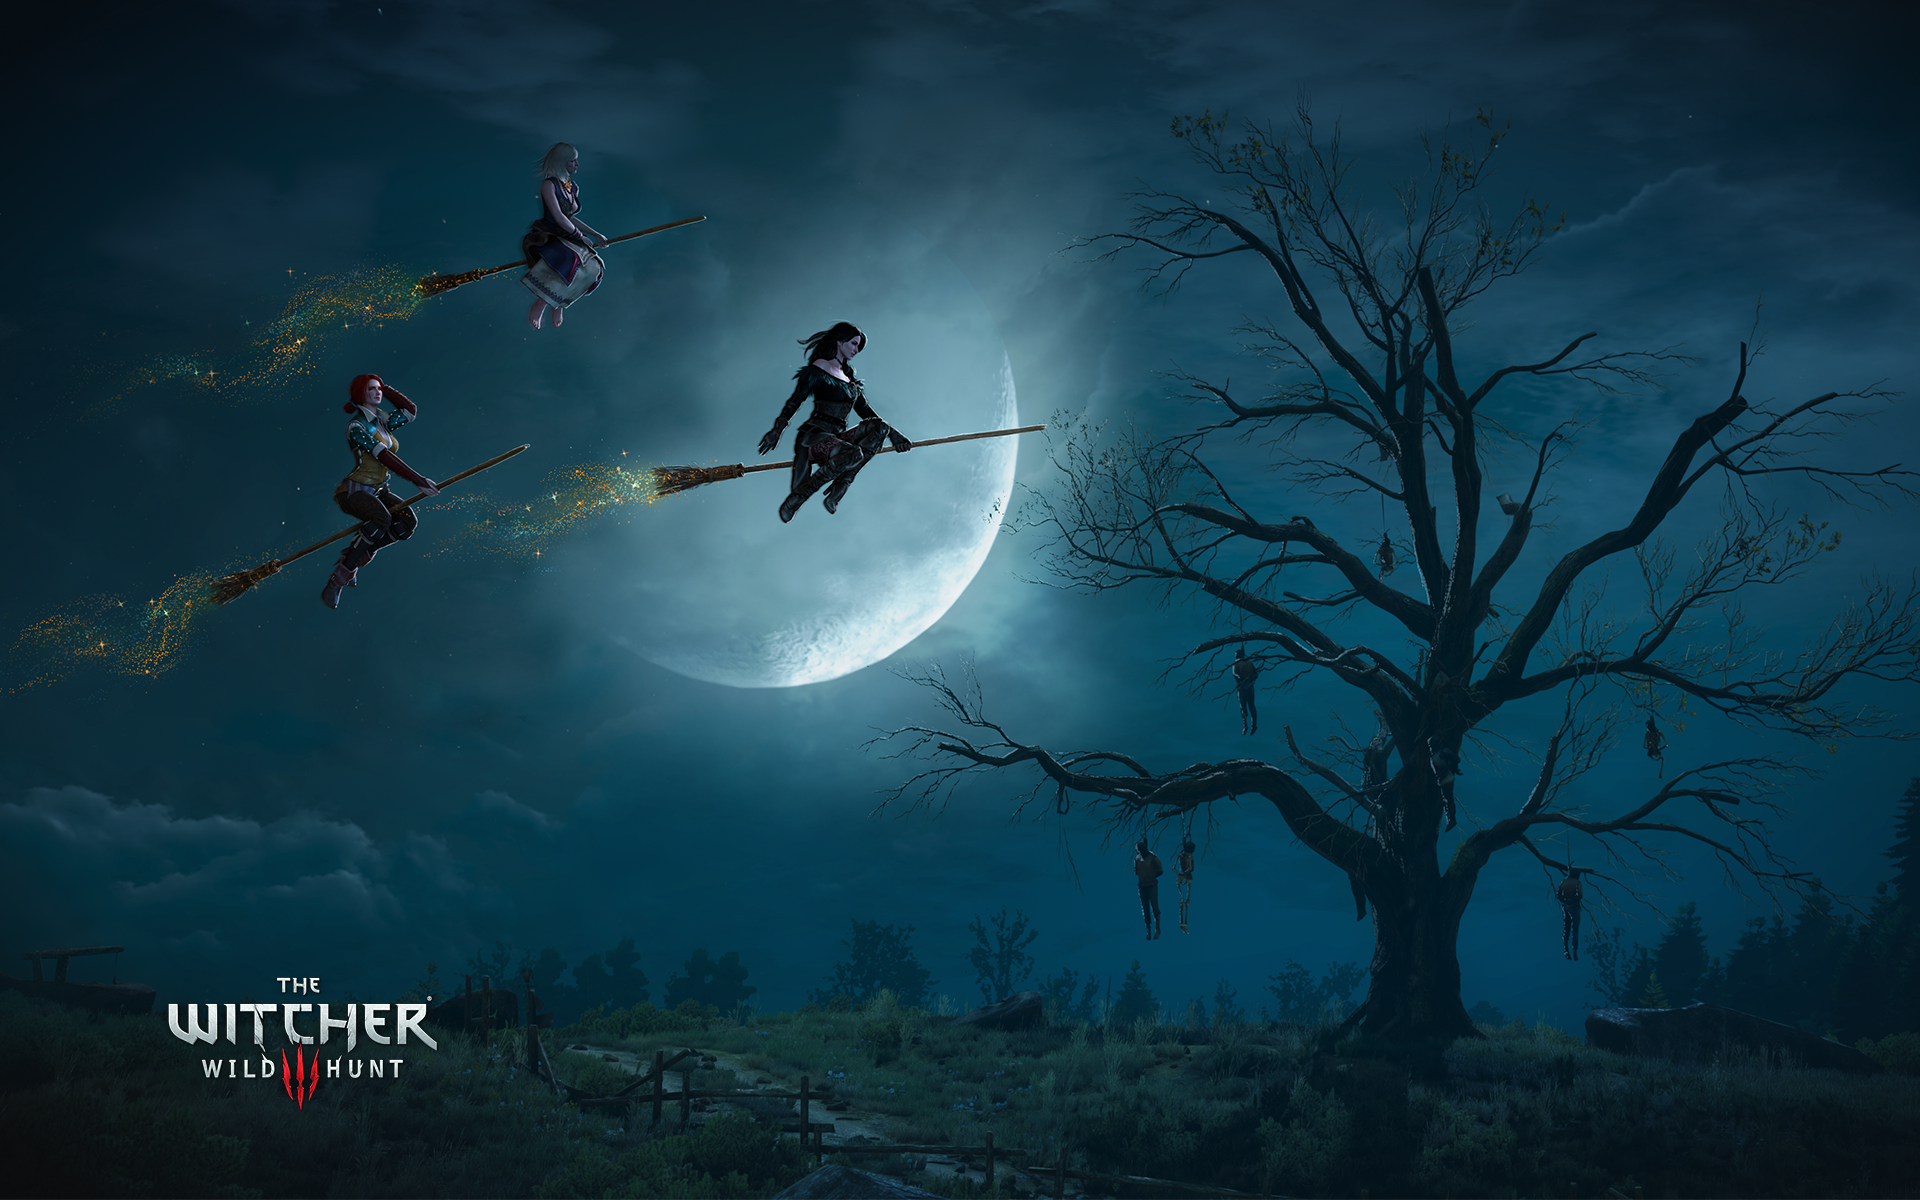 The Witcher Wild Hunt Official Website